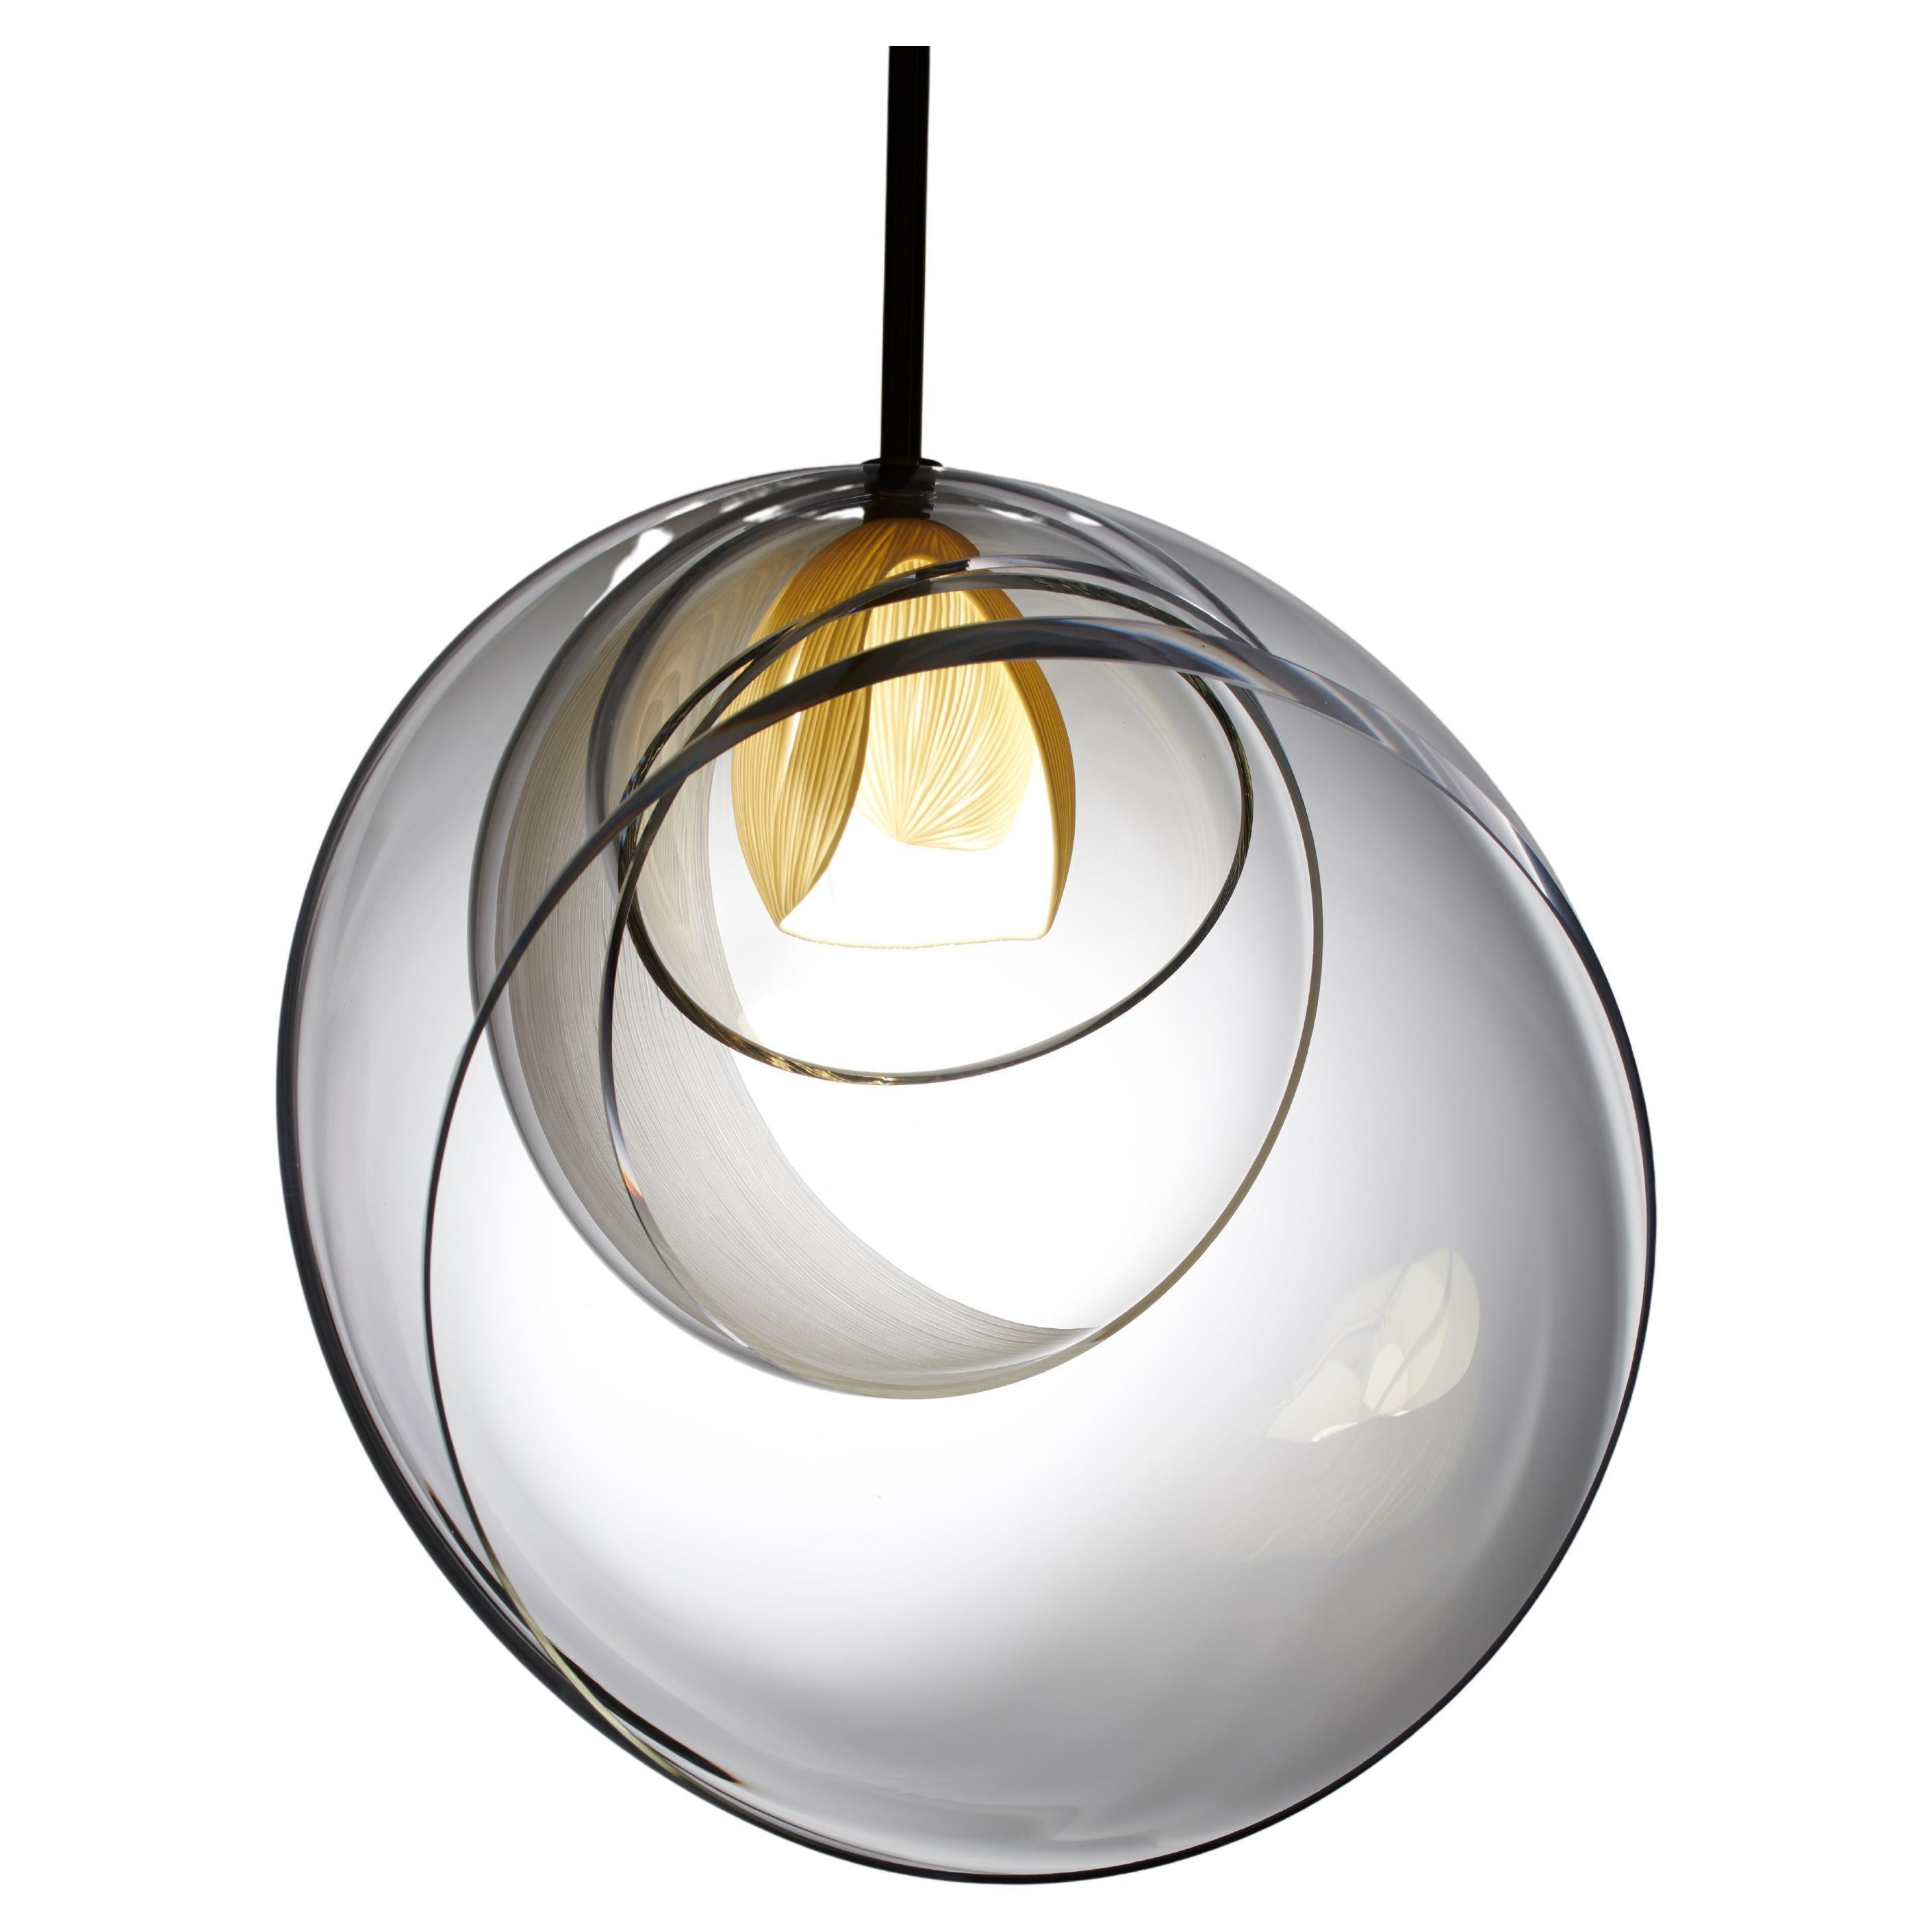 Gem extra large light by Vezzini & Chen
Dimensions: D42cm x H42cm
Materials: Furnace glass, Porcelain, 4w G9 dimmable warm white LED, brushed brass fitting, 2 Core double insulated electric cable + earth.
Also available: Brass Fitting and flex